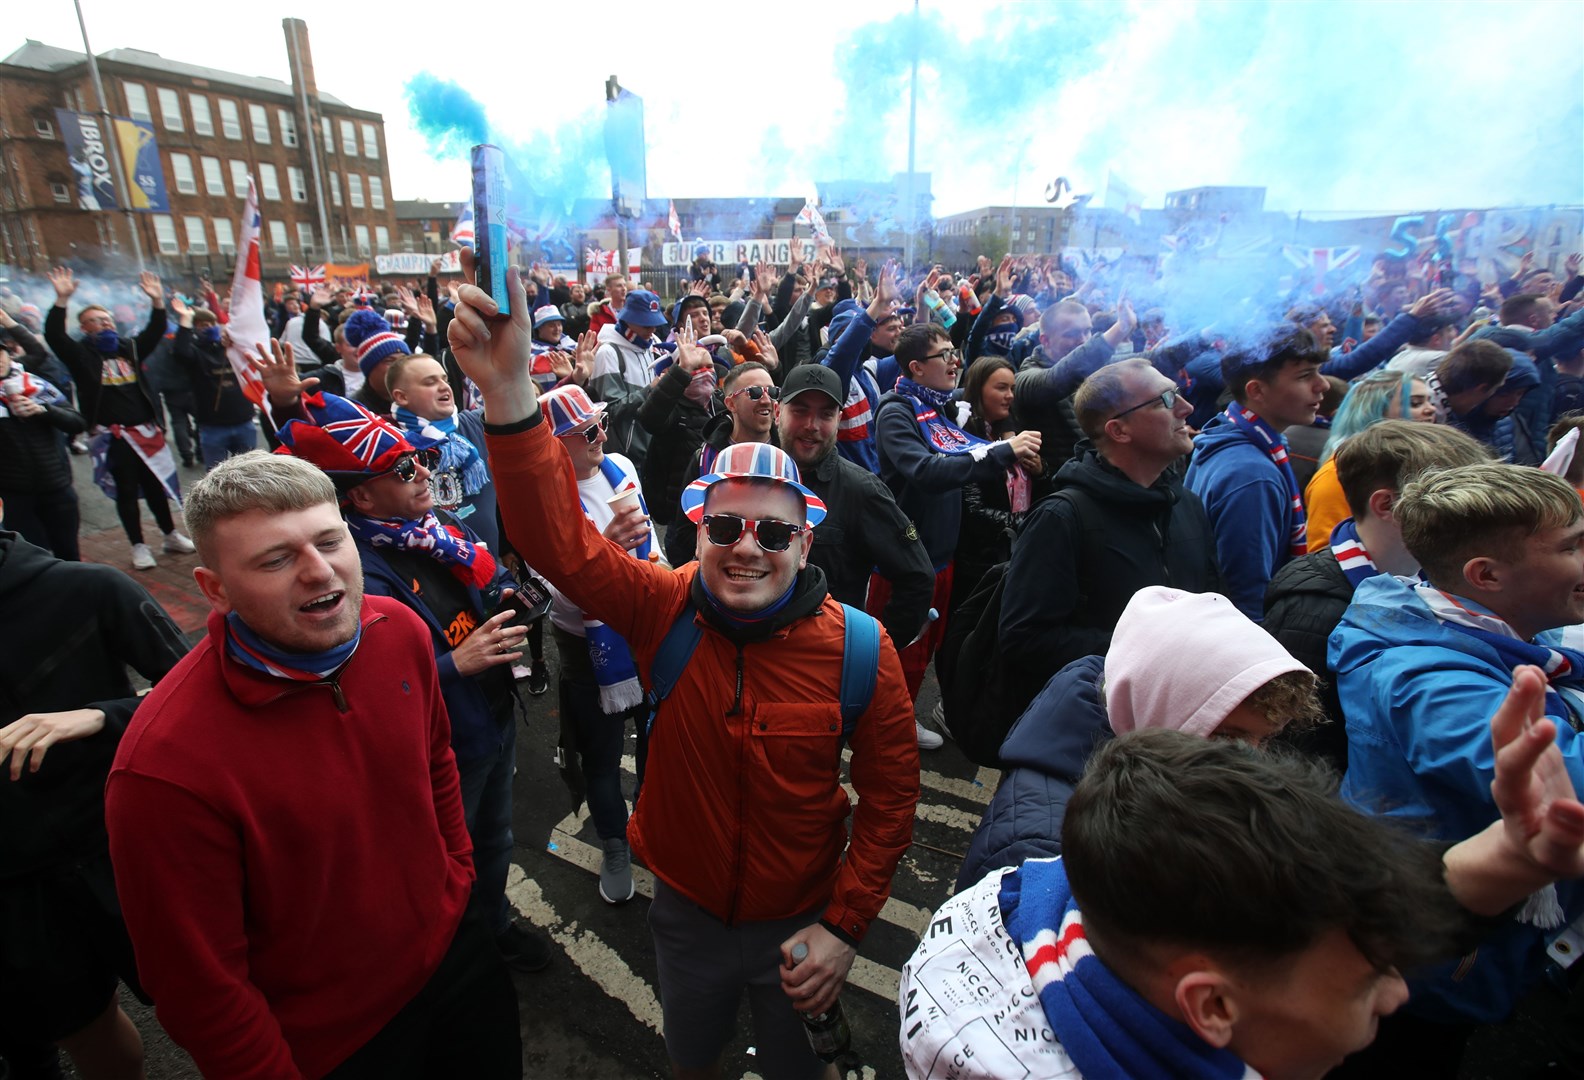 After the match, many Rangers fans headed from Ibrox to George Square (Andrew Milligan/PA)